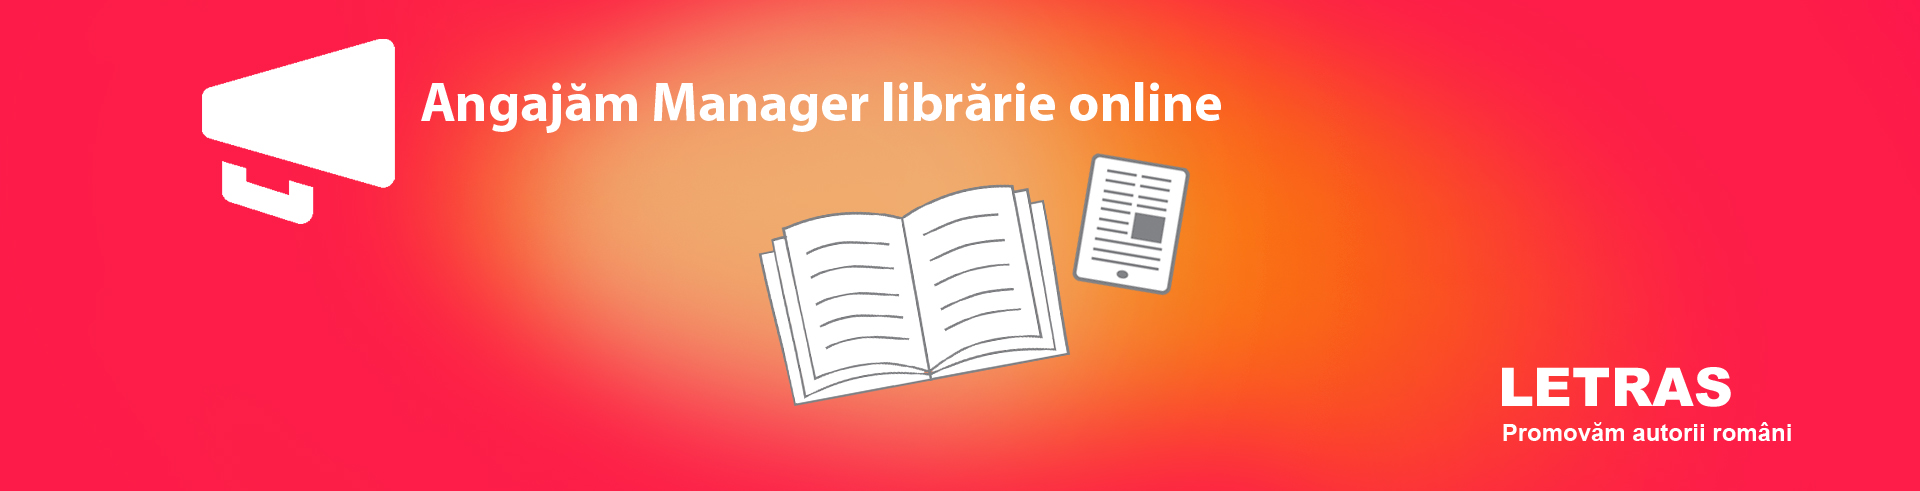 banner angajare manager librarie online copy